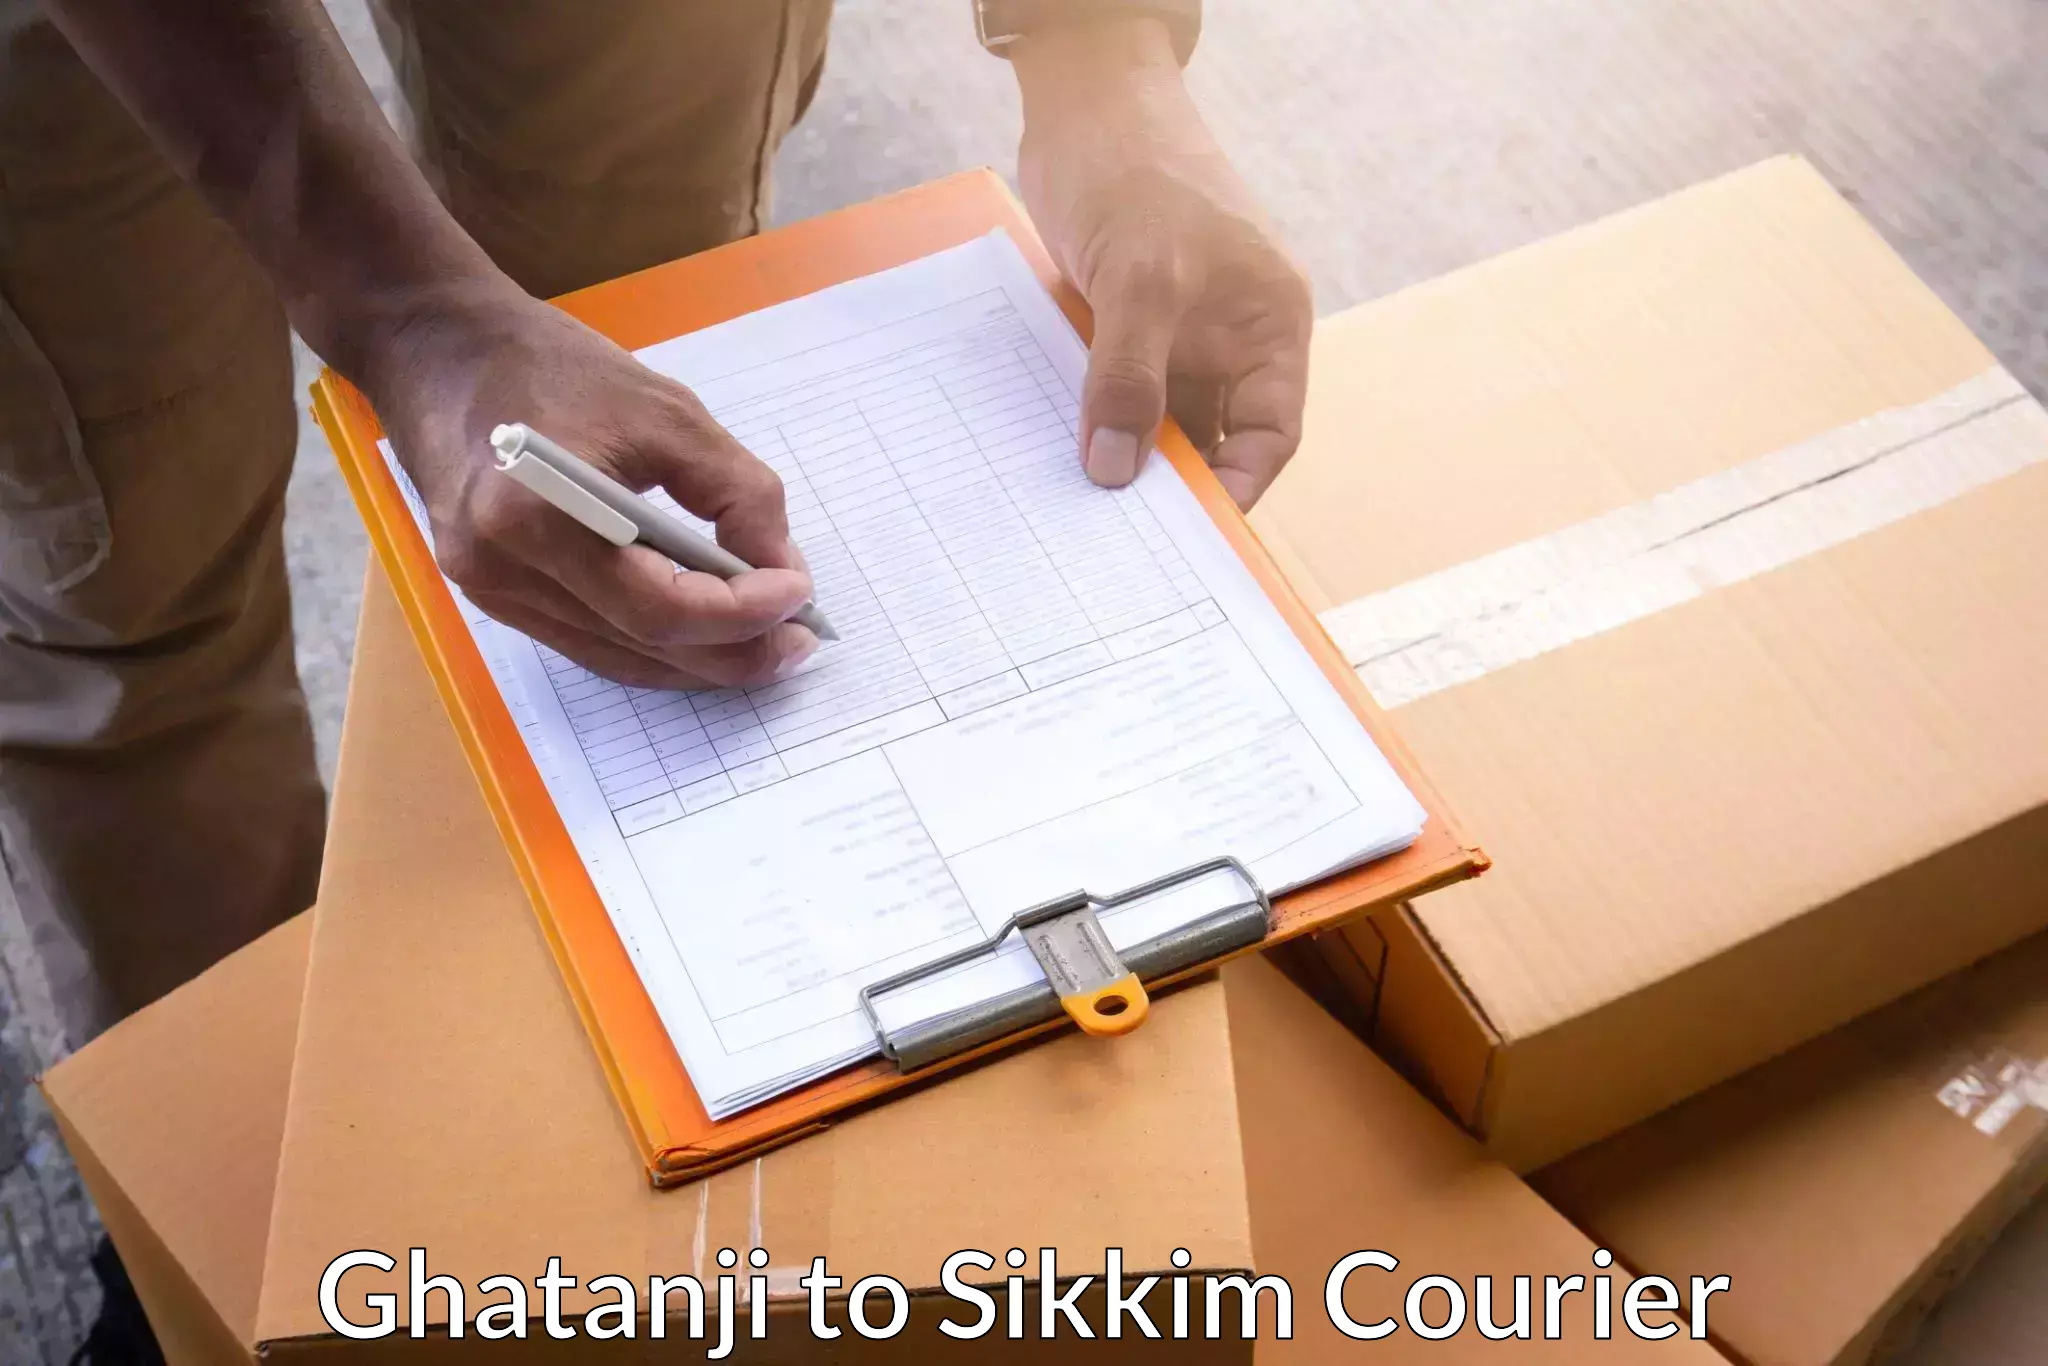 Courier service comparison in Ghatanji to North Sikkim